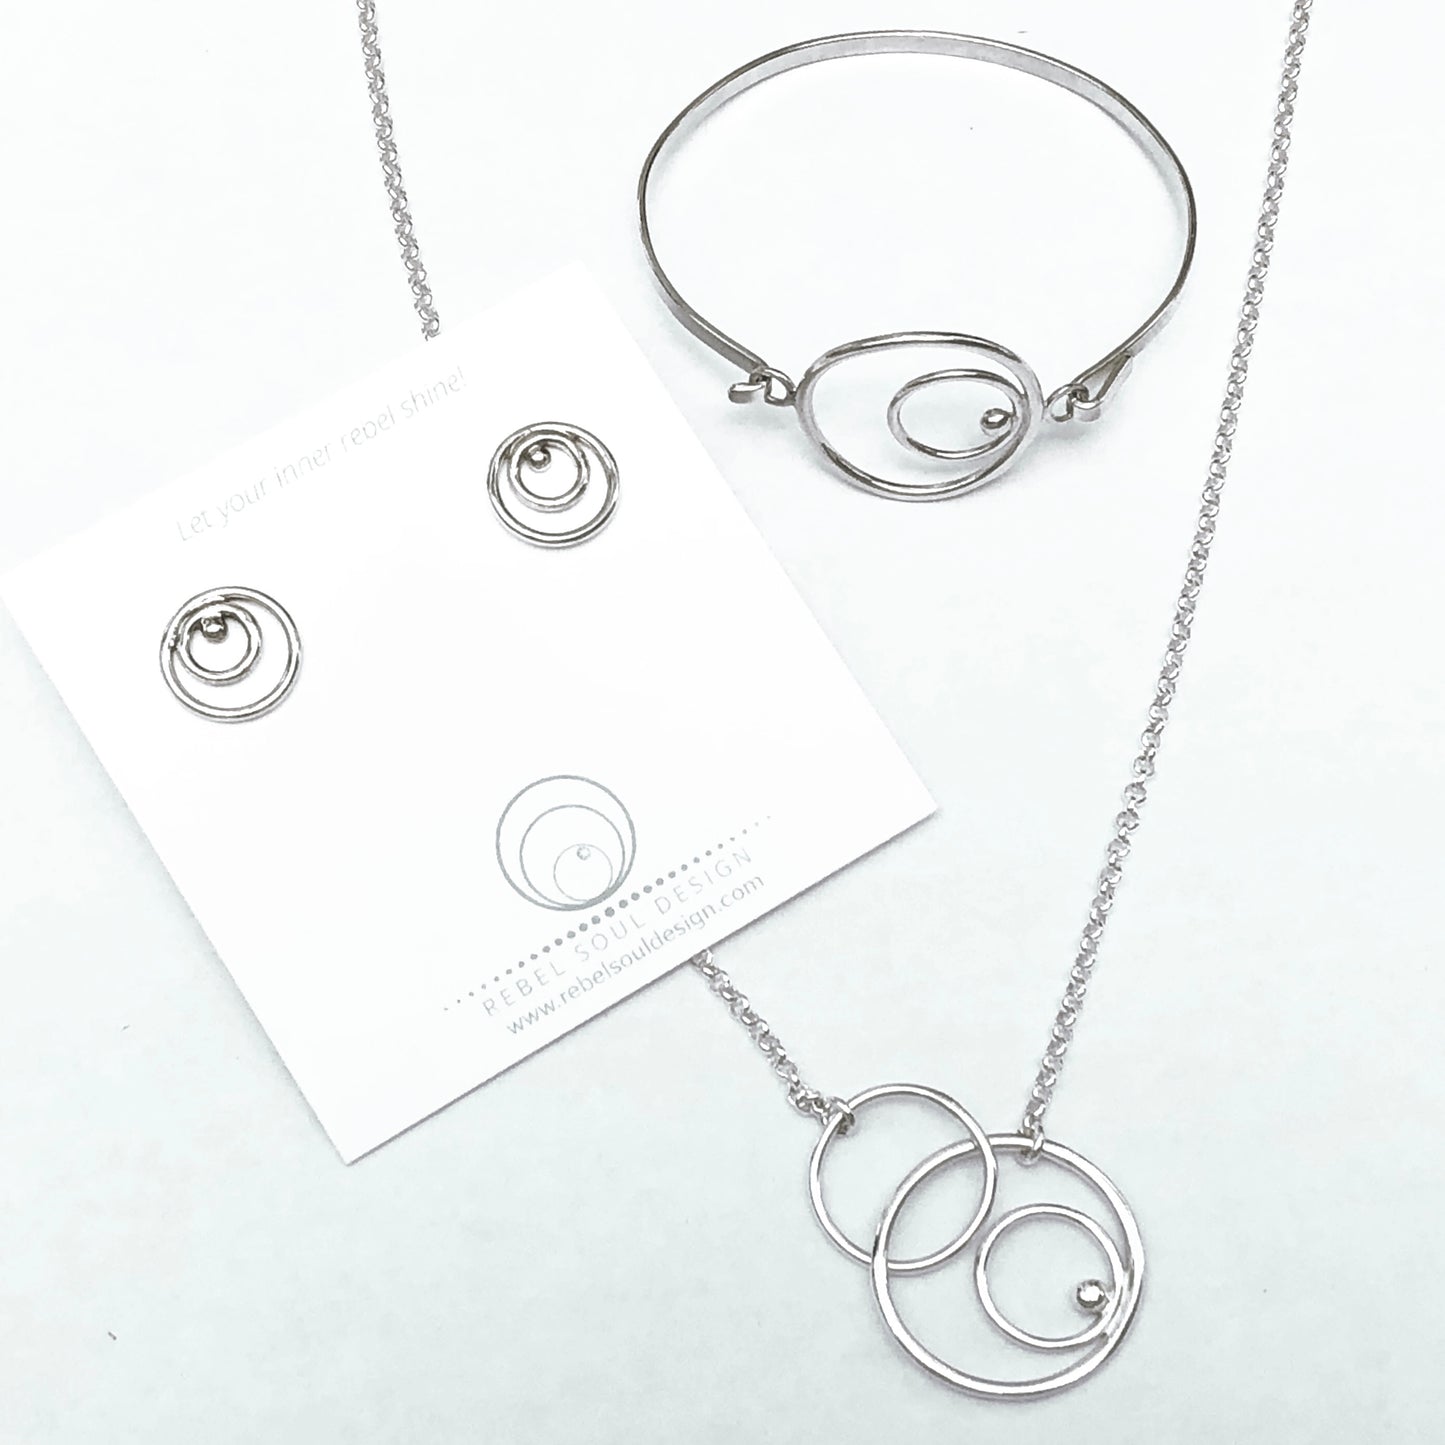 Orbital linked necklace with coordinating earrings and bracelet